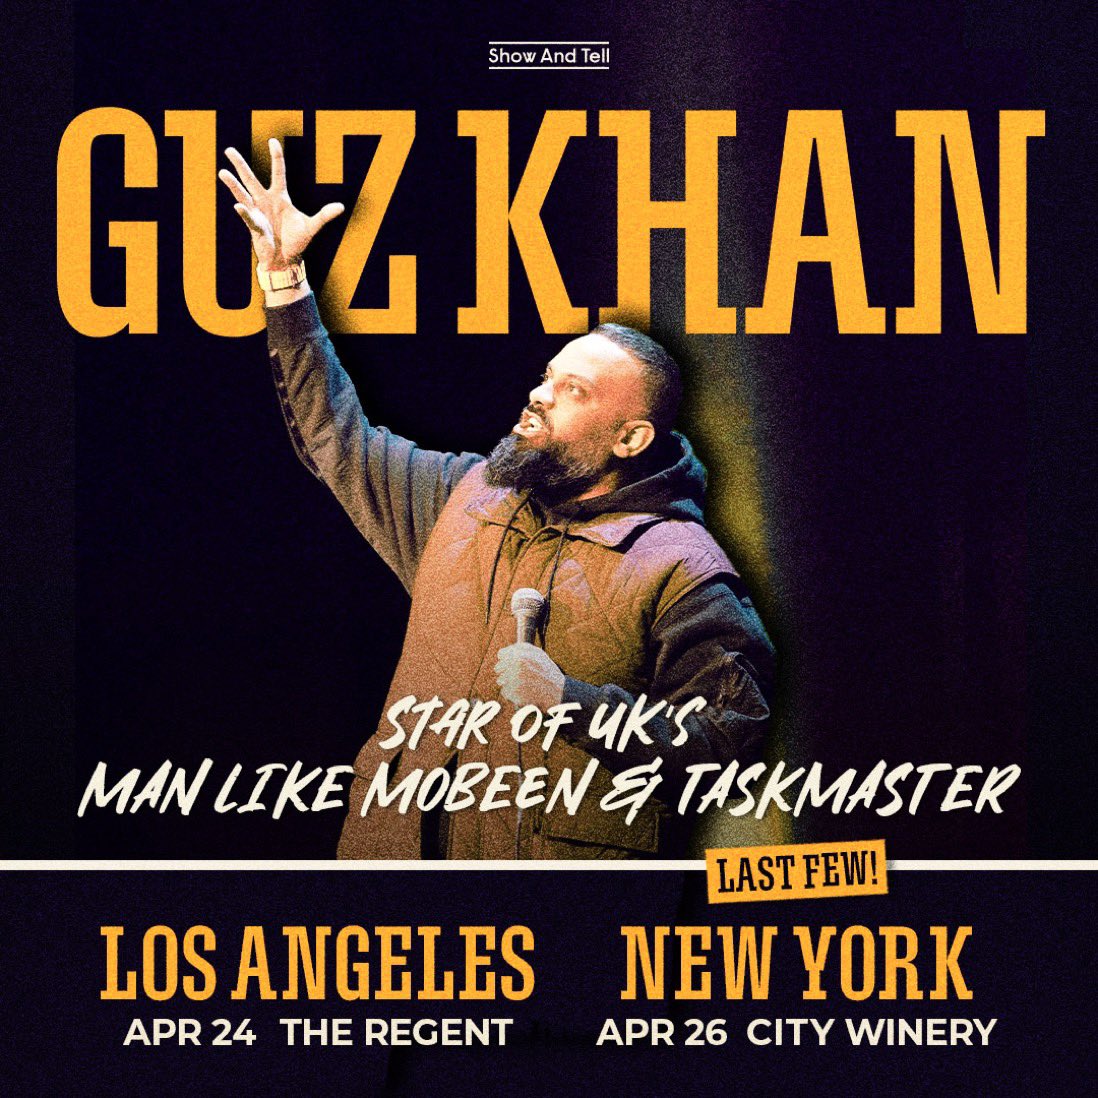 Thrilled to open for my brother @GuzKhanOfficial for his LA show on 4/24. One night only. Come through to see one of the most hilarious people I know👊🏾🎤✨ showandtellpresents.com/events/guz-kha…